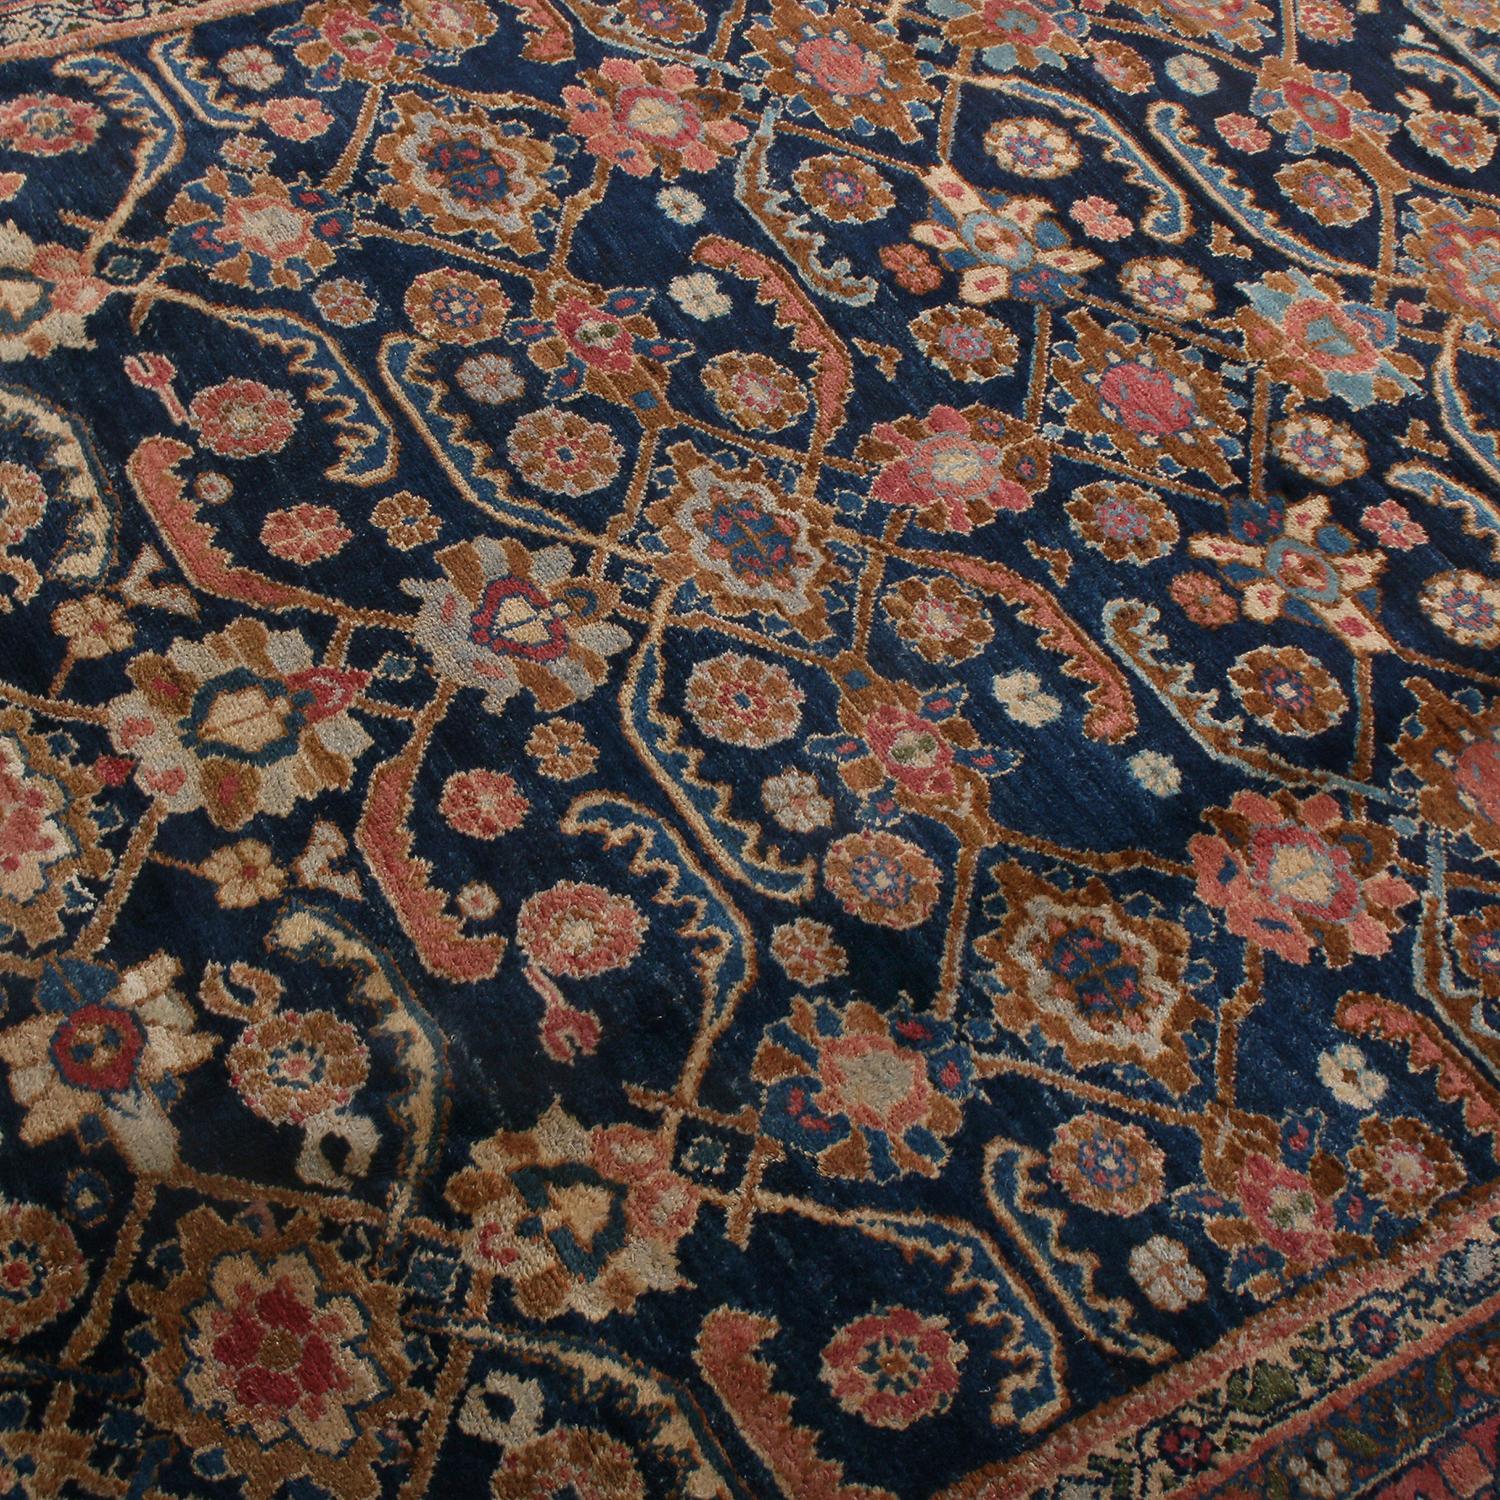 Hand-Knotted Antique Hamadan Geometric-Floral Red and Navy Blue Wool Persian Rug